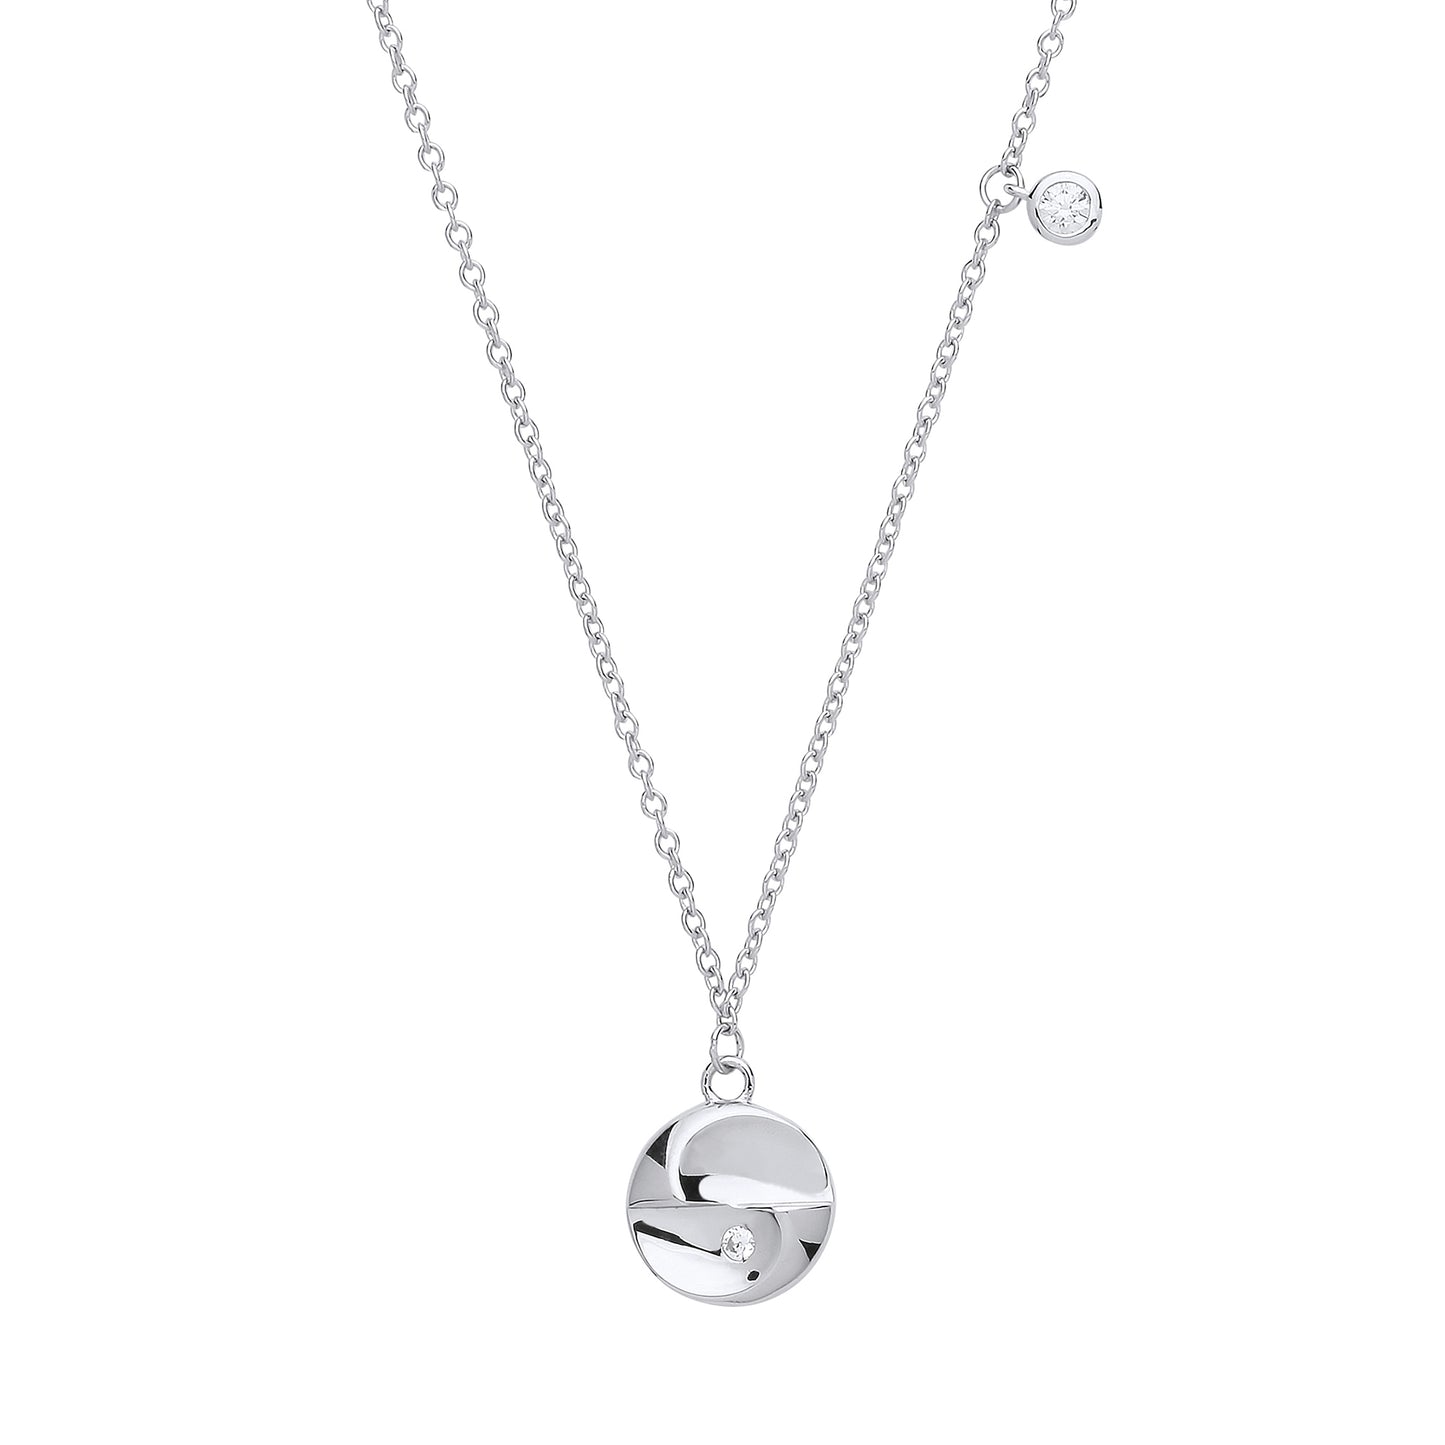 Silver  CZ Concave Disc Charm Necklace 18 inch - GVK252